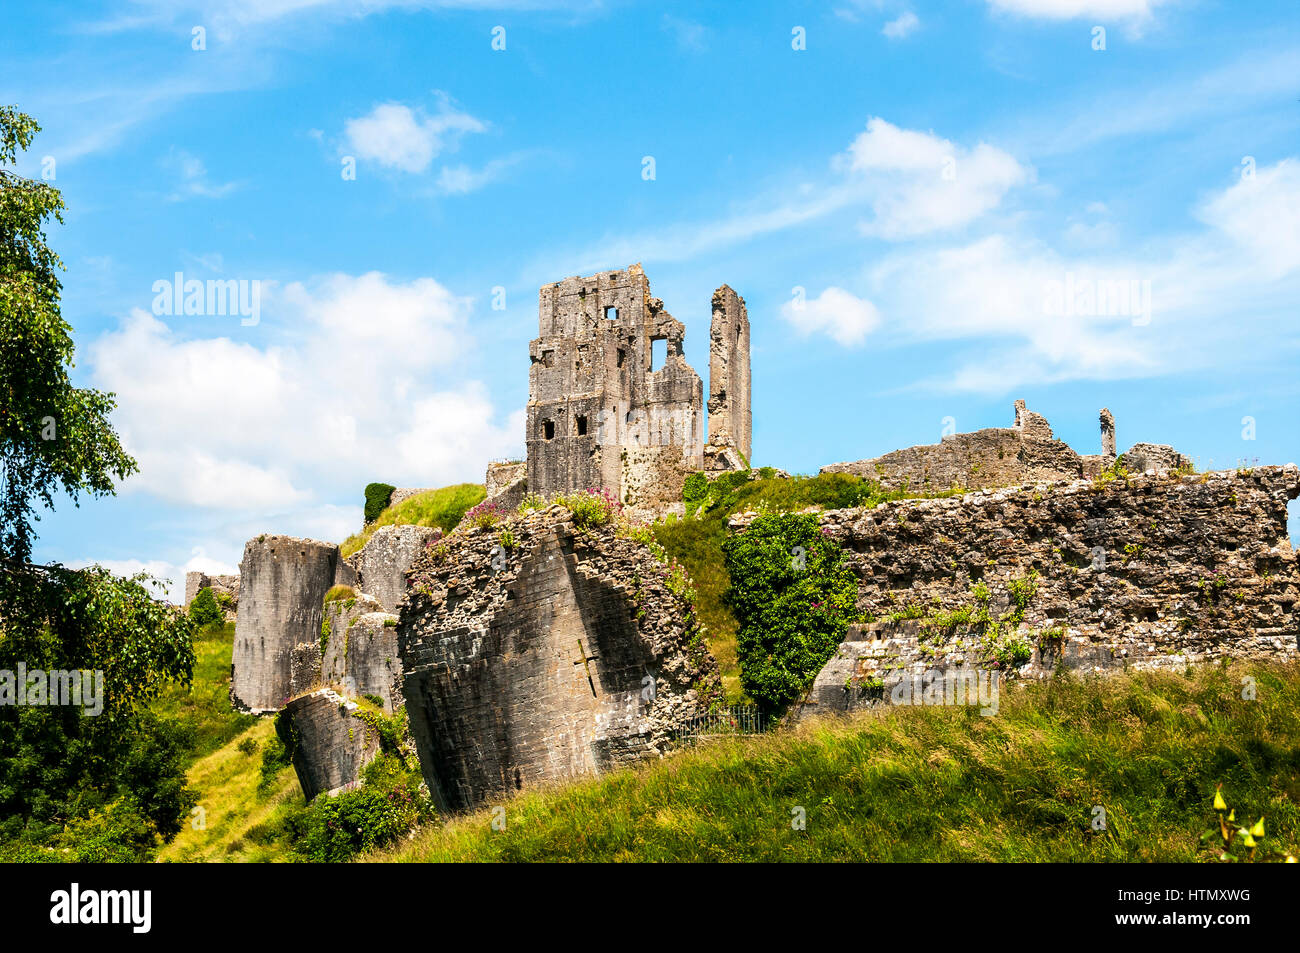 The Keep of the romantic ruins of 1000 year old Corfe Castle standing above fallen towers and walls, amid a profusion of wild flowers Stock Photo